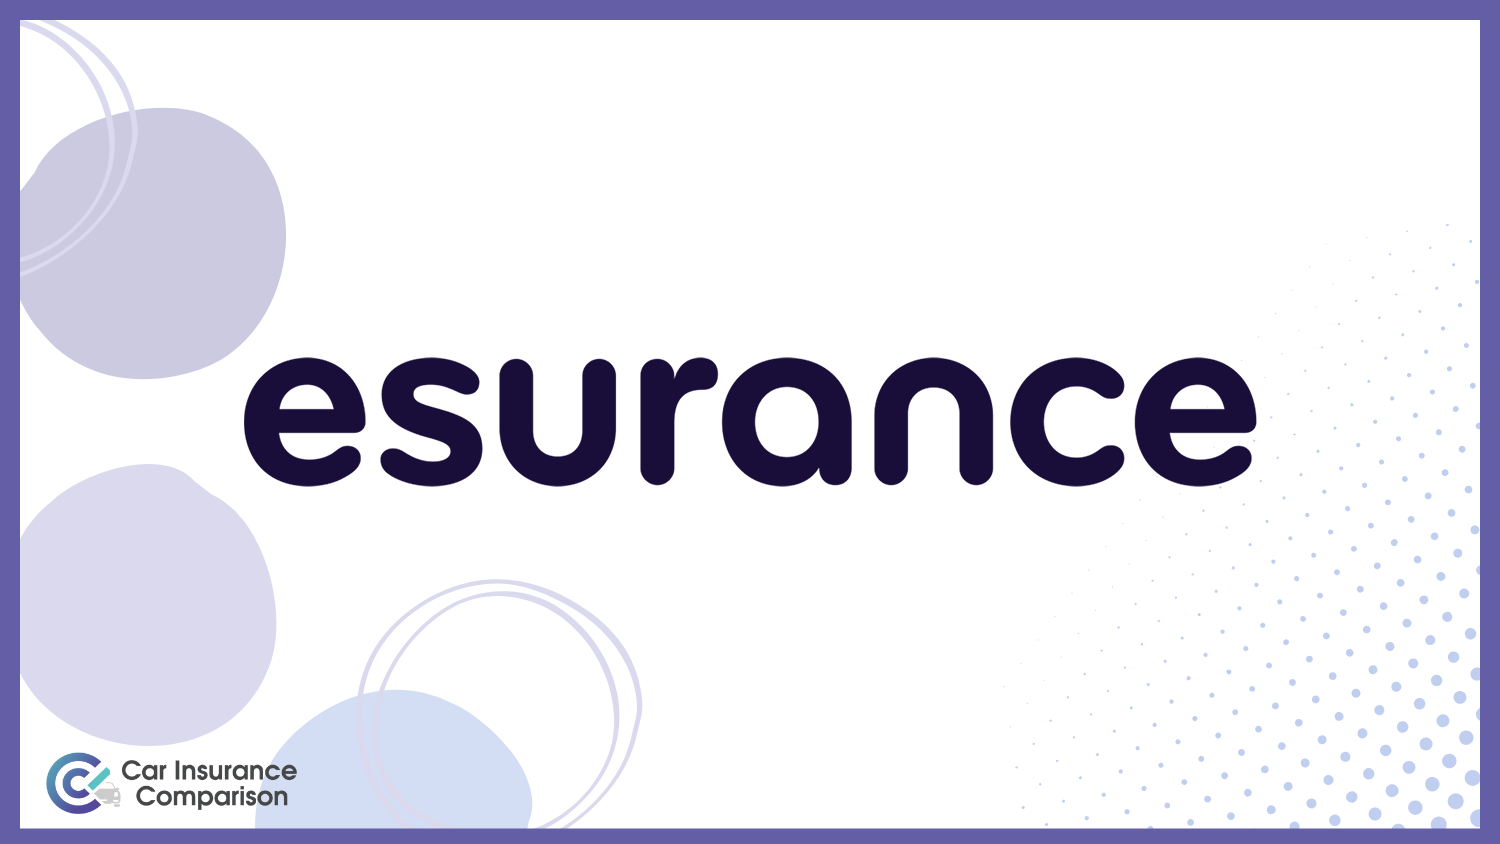 Esurance: Best Car Insurance for Drivers With Epilepsy